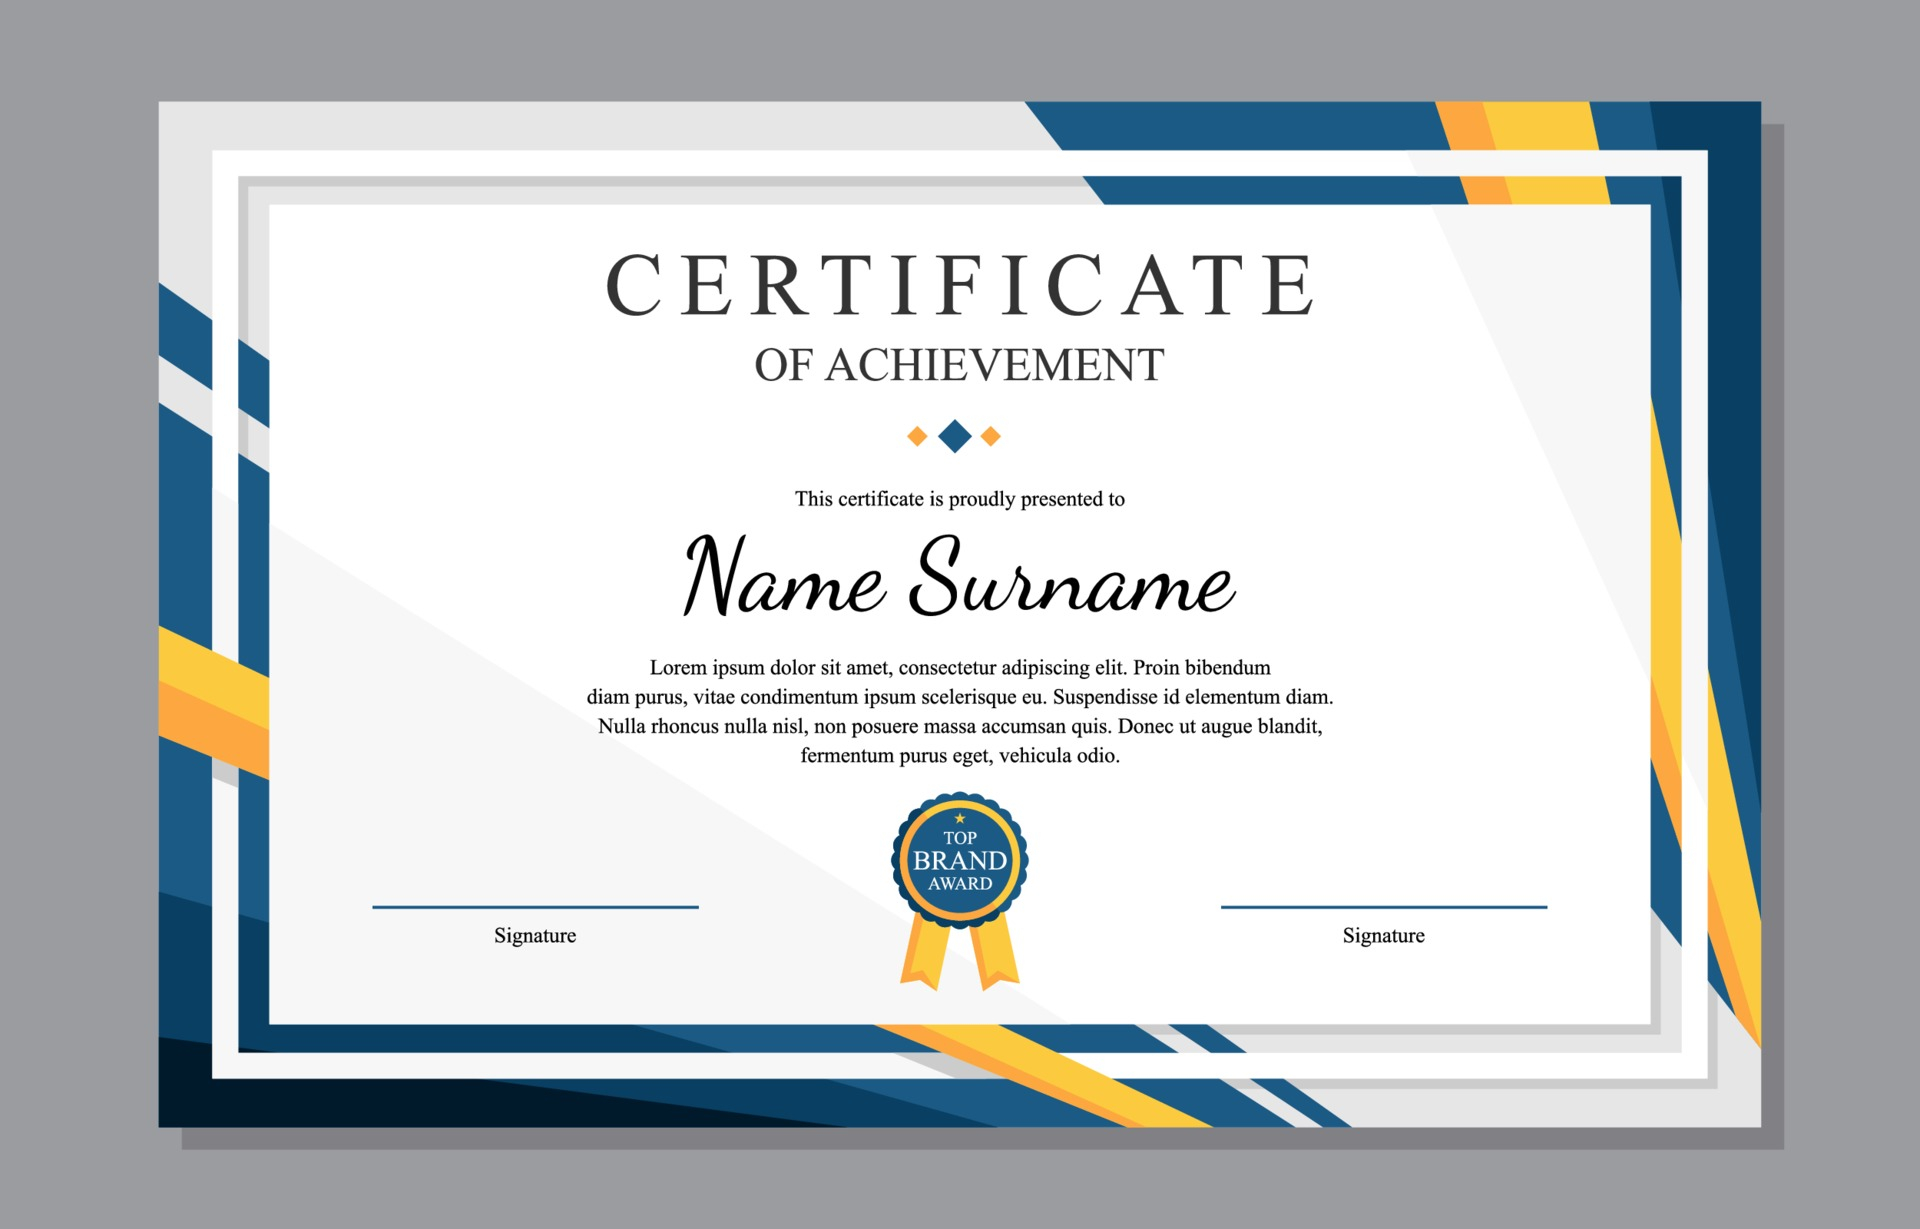 Certificate Templates, Free Certificate Designs Pertaining To Blank Certificate Of Achievement Template